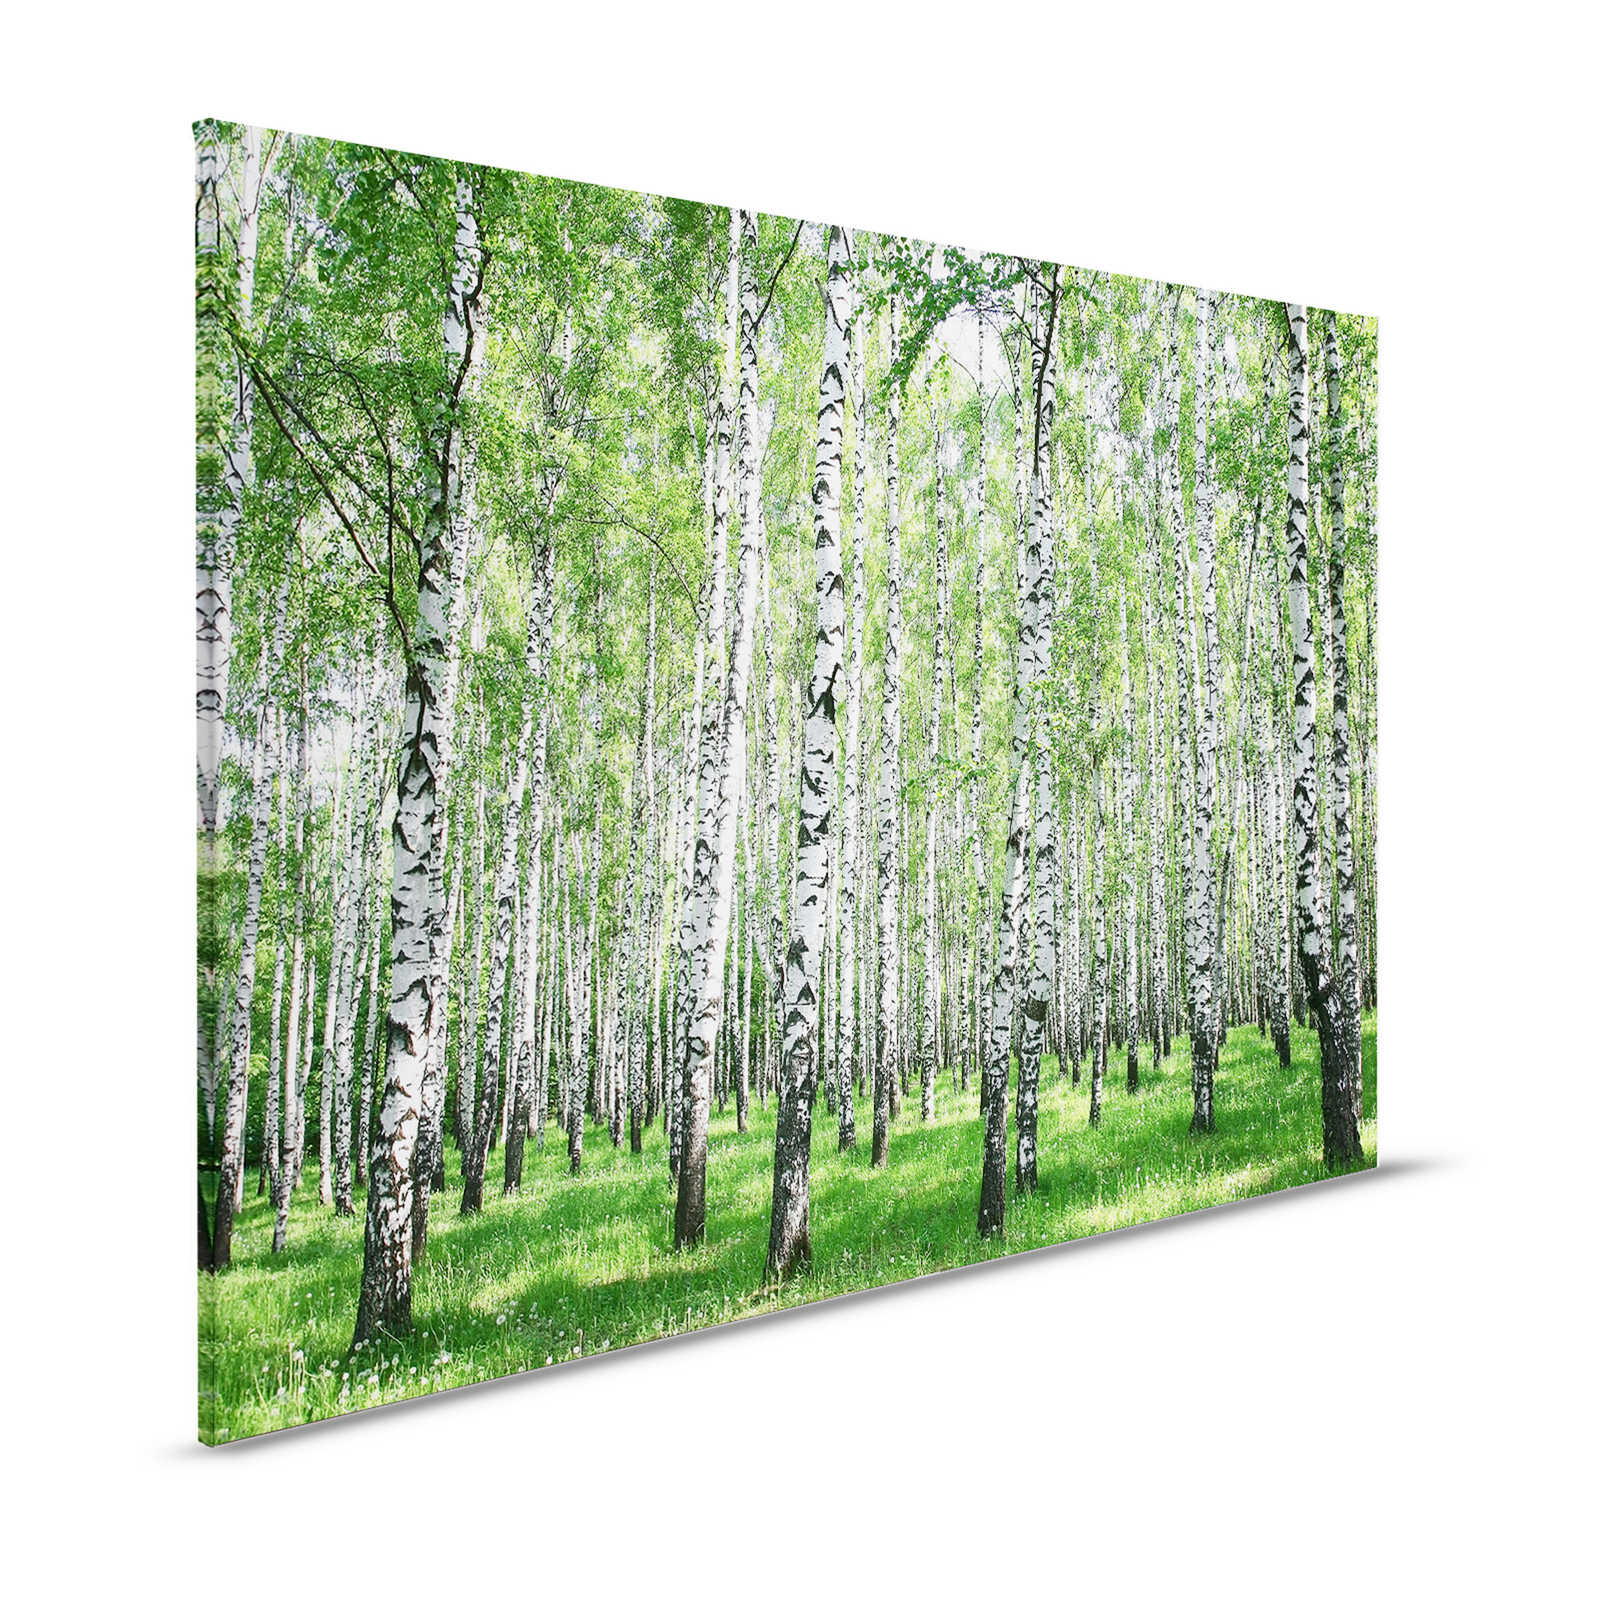 Landscape canvas picture Birch Forest with Meadow - 1,20 m x 0,80 m
